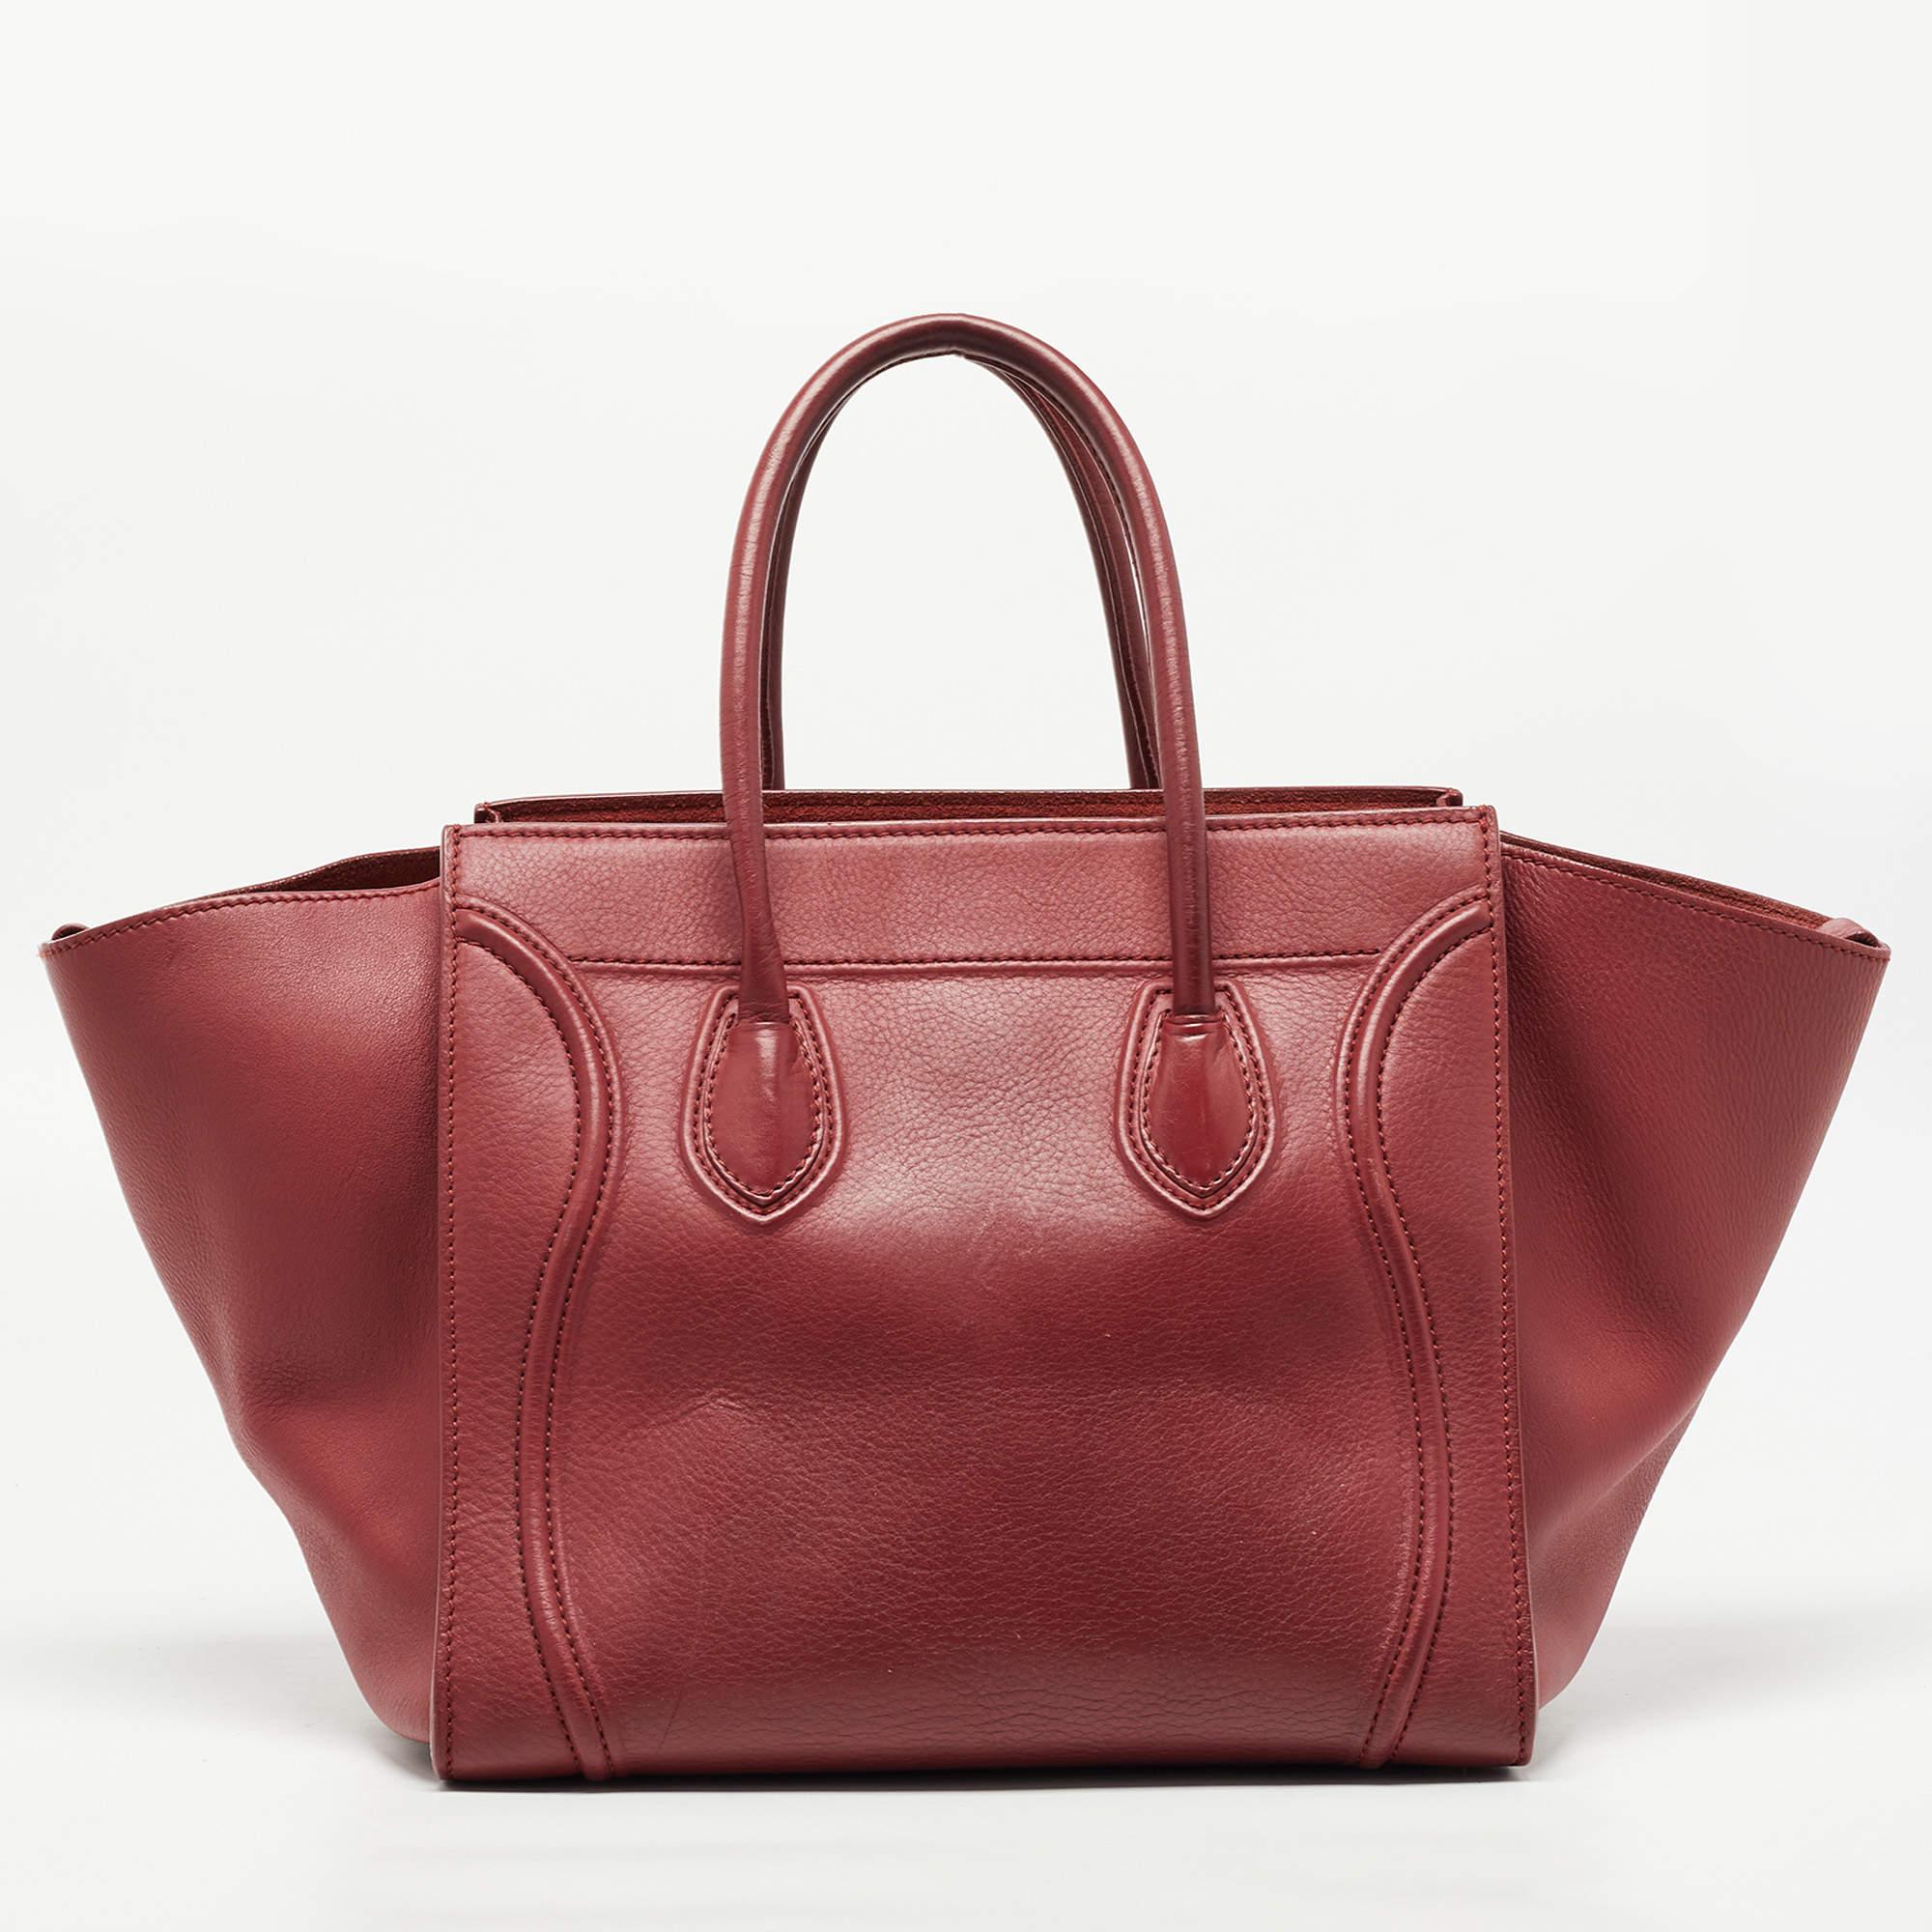 The phantom by Celine is a modernized update of the luggage bag by the brand. This tote has been constructed from python leather, and the design is highlighted with a wide wingspan, and its front zipper pocket is equipped with a braided slider. The